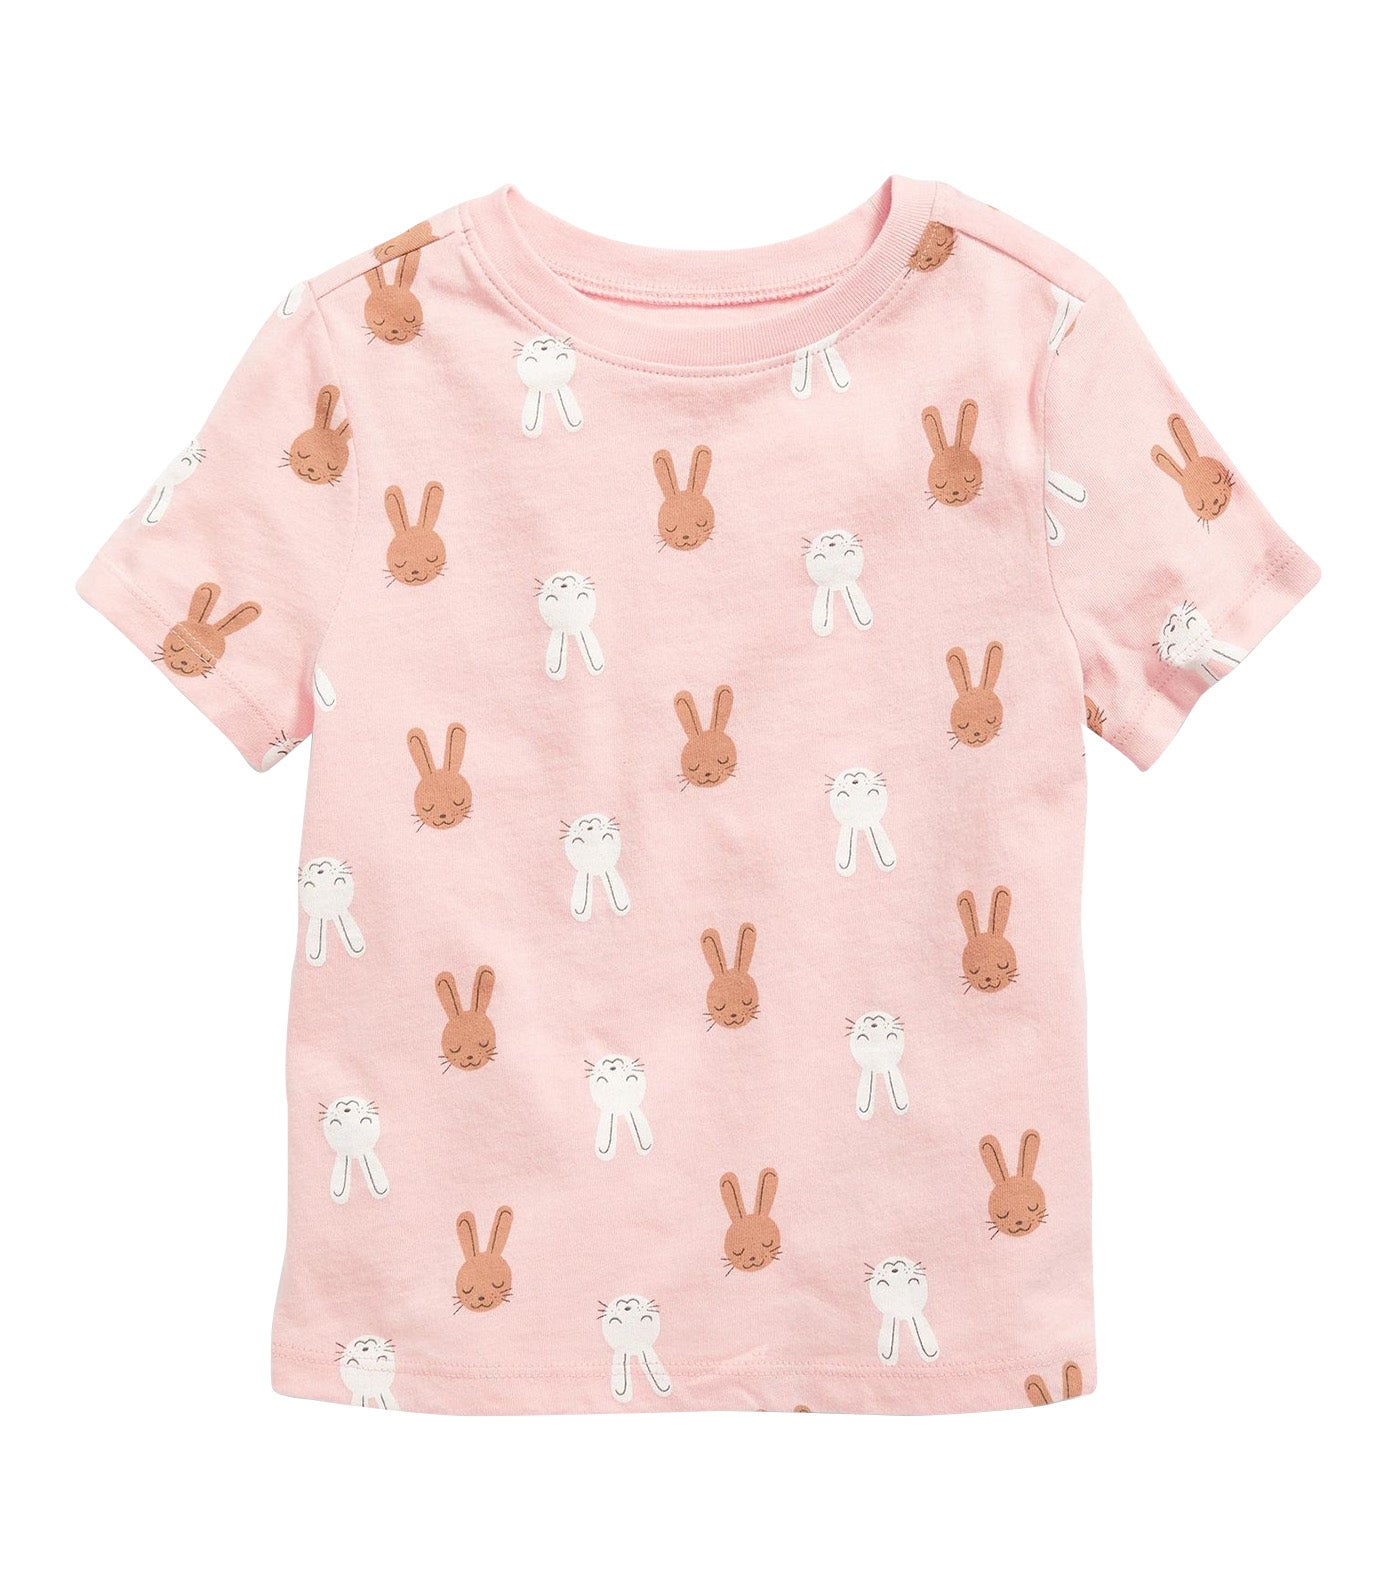 Unisex Printed Crew-Neck T-Shirt for Toddler - Pink Bunny